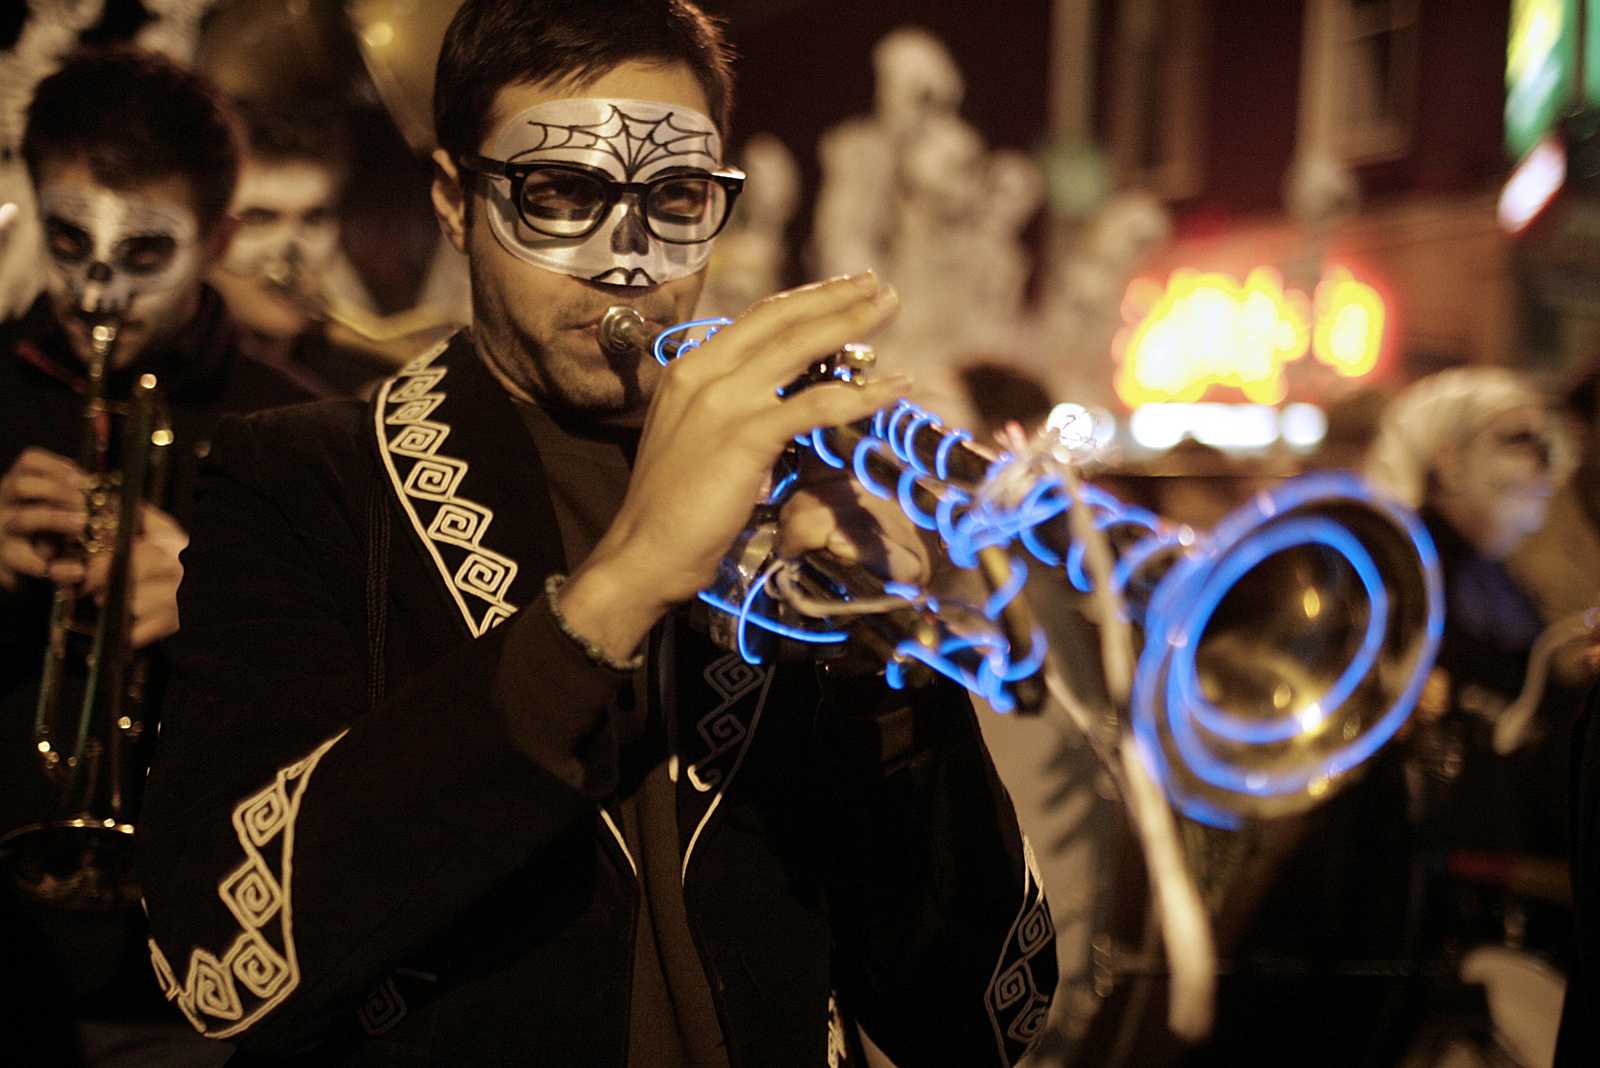 A performer plays a trumpet laced with blue lights during the Día de Muertos parade on Nov 2. The parade took place in San Francisco's Mission District. Photo by John Ornelas / Xpress